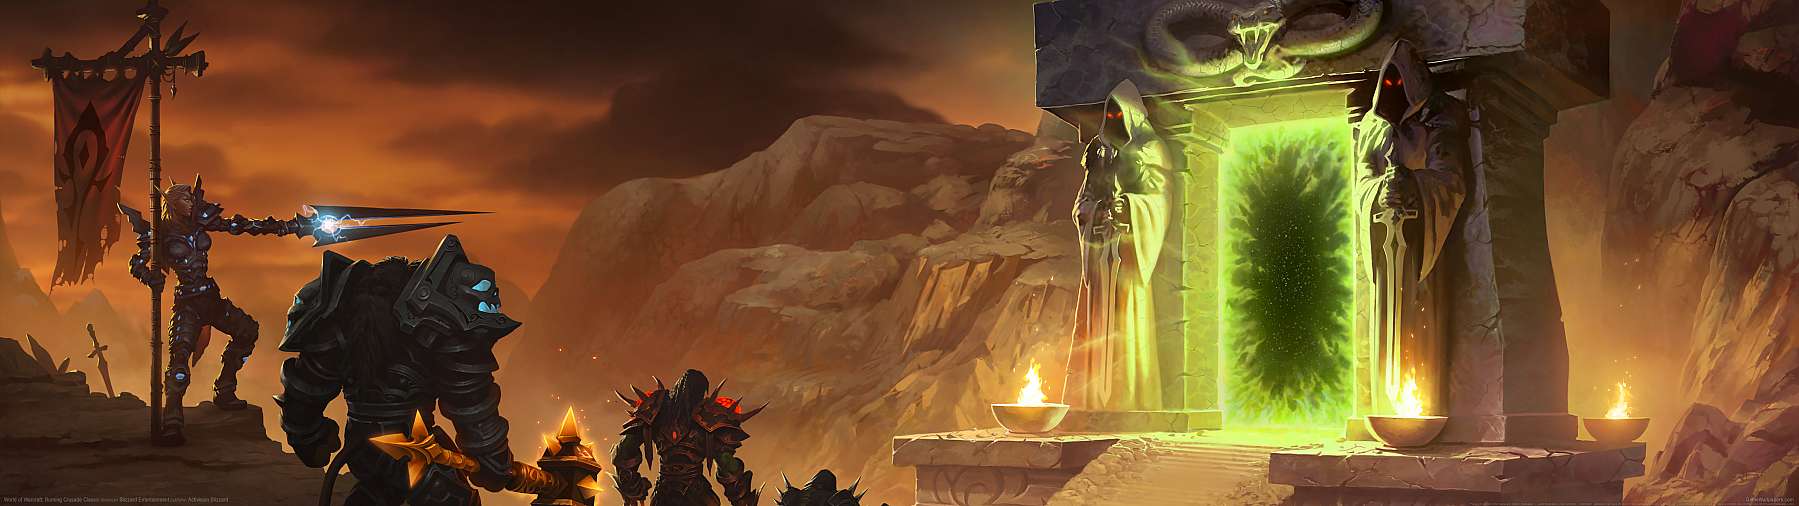 World of Warcraft: Burning Crusade Classic wallpaper or background